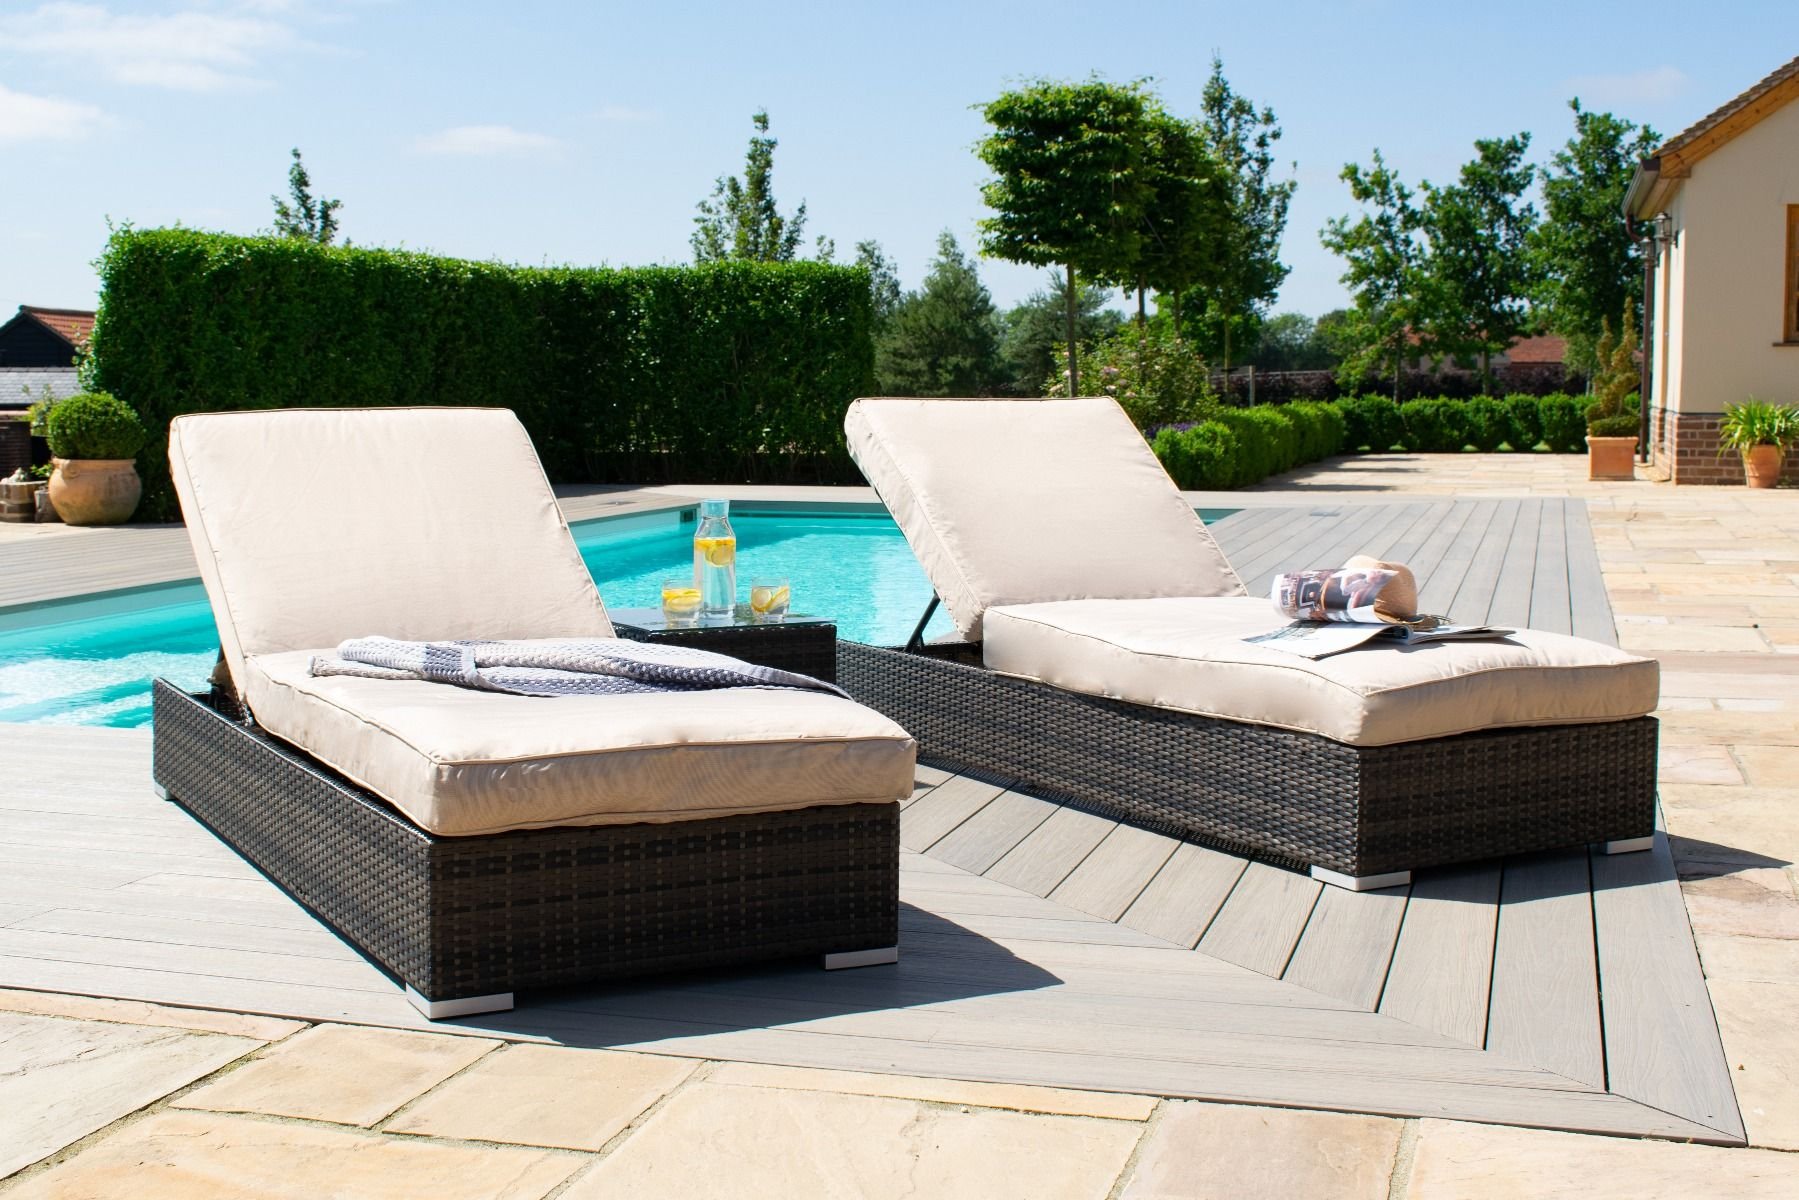 Maze Rattan Orlando Sunlounger Set - Brown | The Clearance Zone